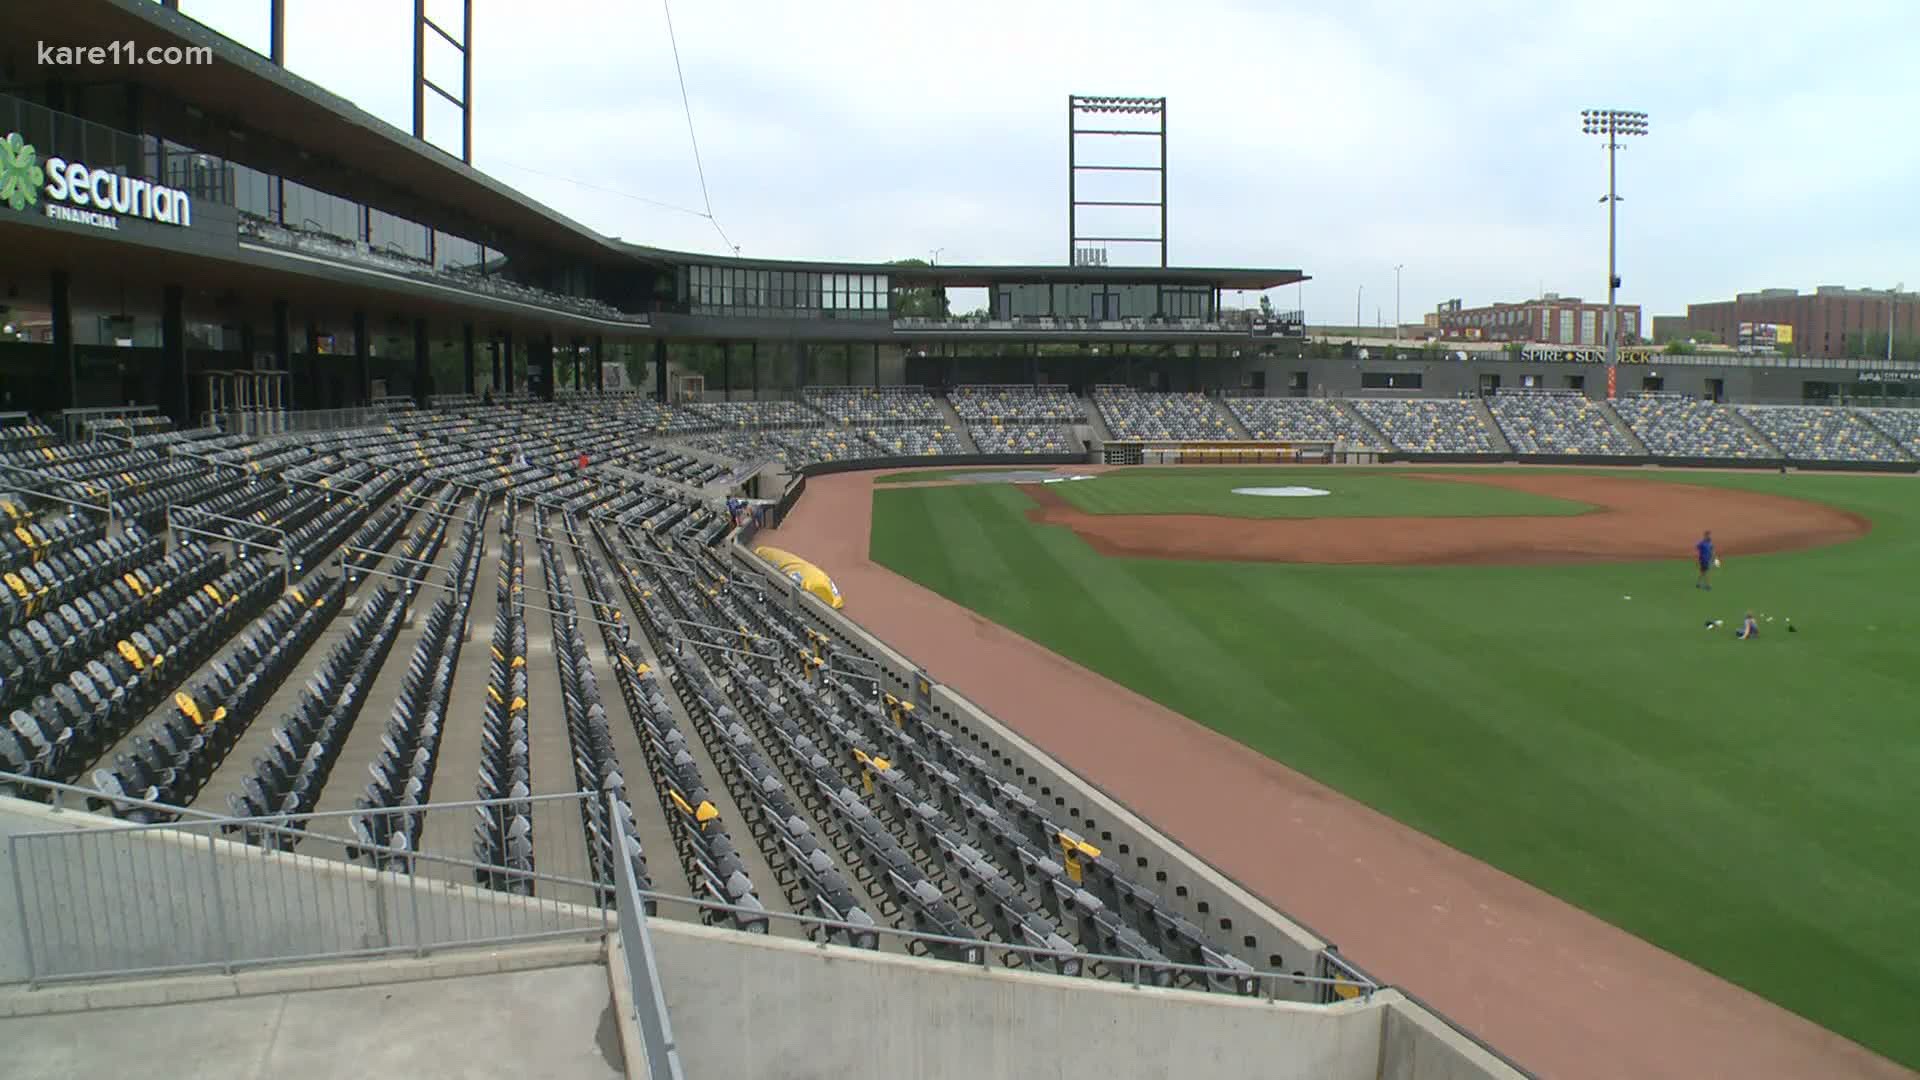 The stands may be empty but fans are still getting a taste of baseball. CHS Field has opened a Pop-Up Cafe, open seven days a week from 11 a.m. to 2 p.m.